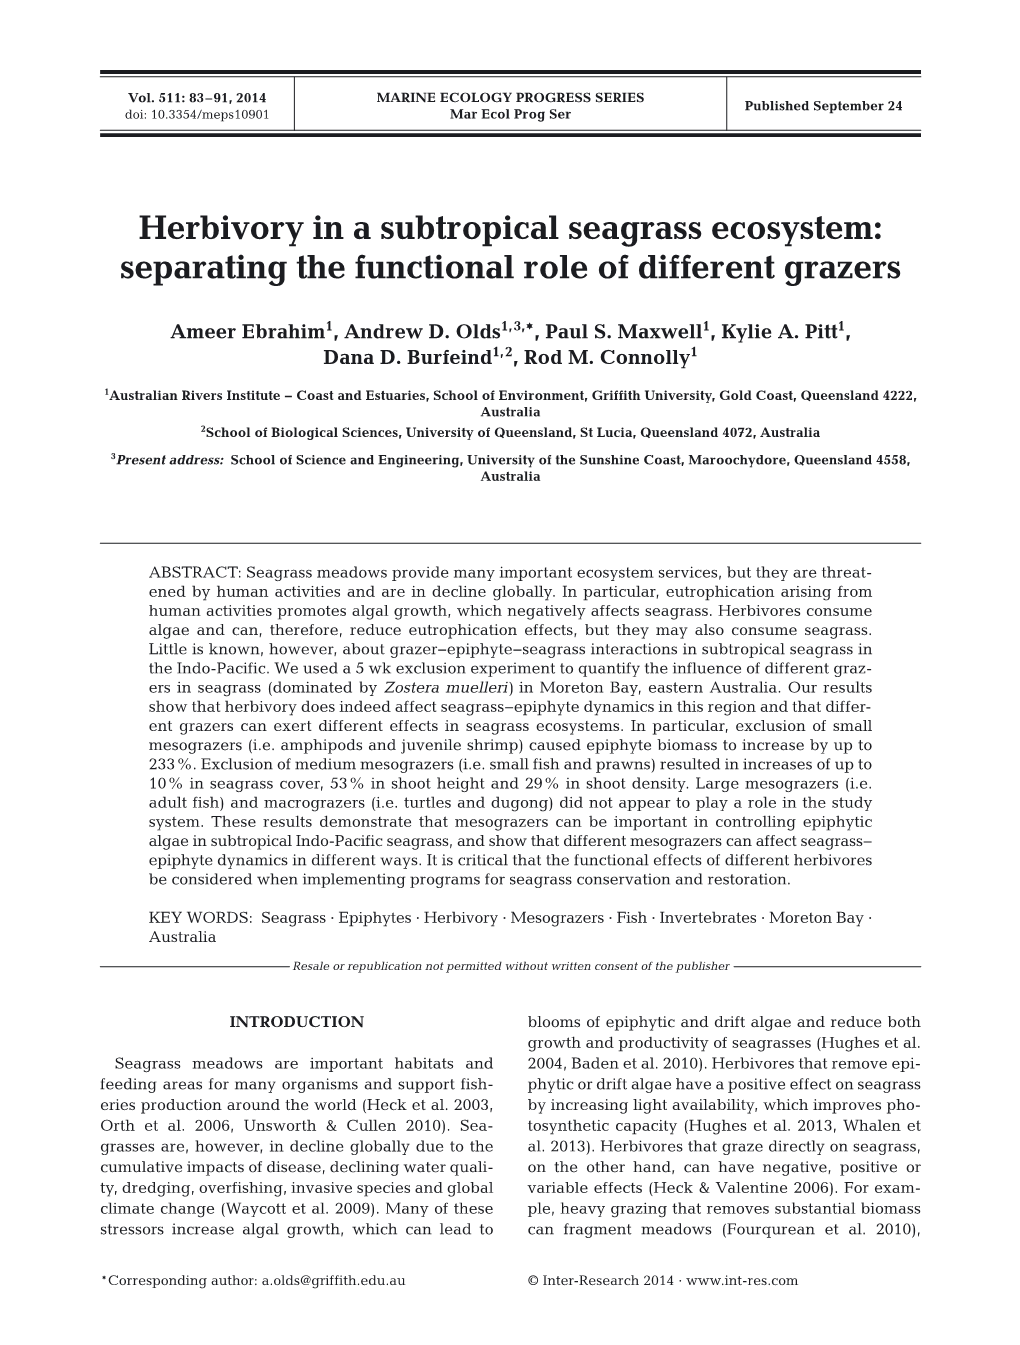 Herbivory in a Subtropical Seagrass Ecosystem: Separating the Functional Role of Different Grazers